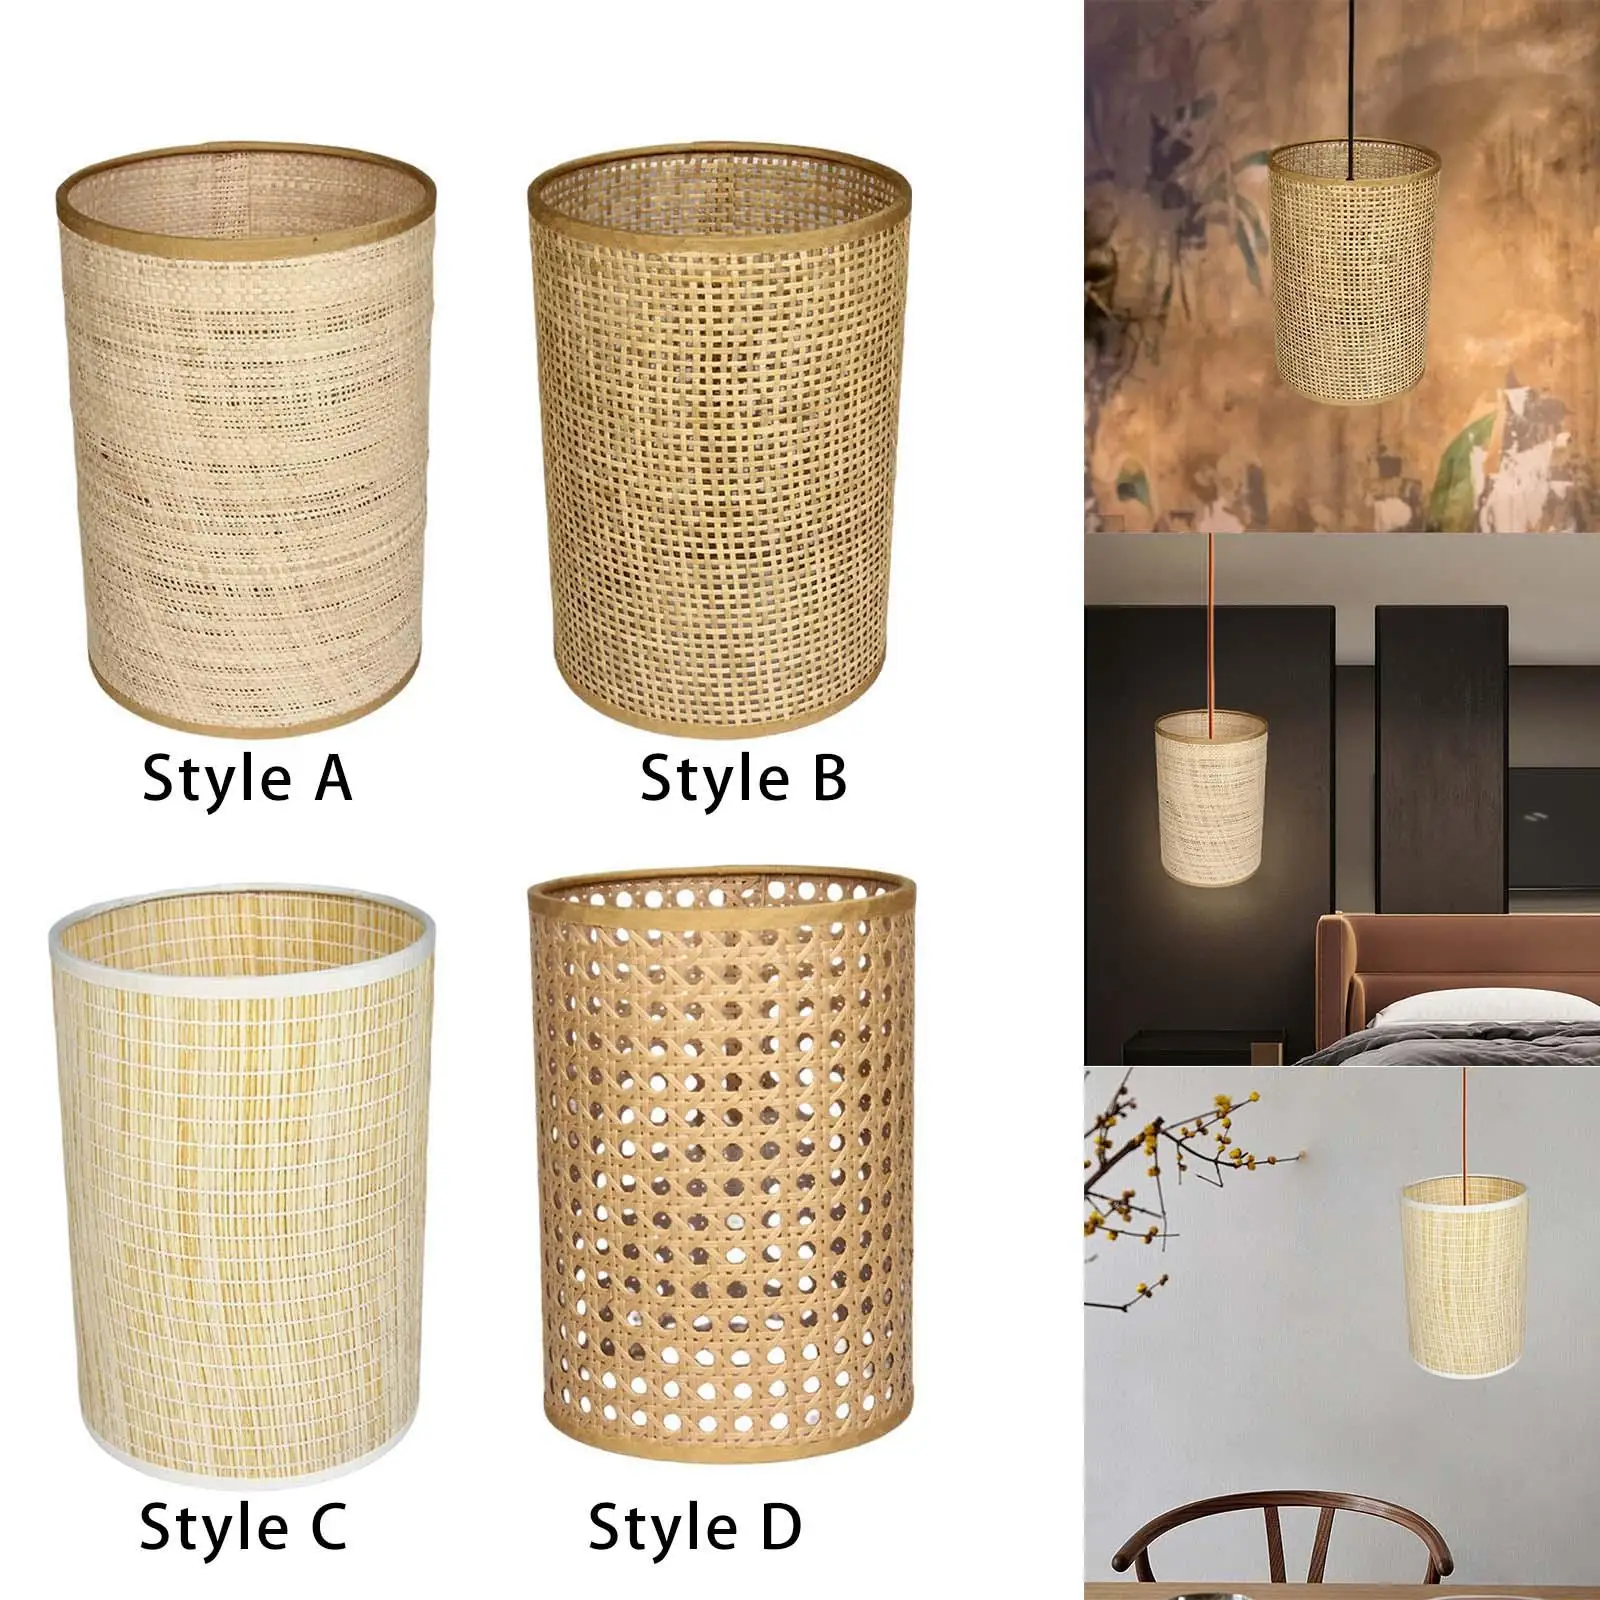 Classic Woven Rattan Lamp Shade Ceiling Light Cover Decorative Lantern Lampshade for Bedroom Kitchen Home Living Room Decor